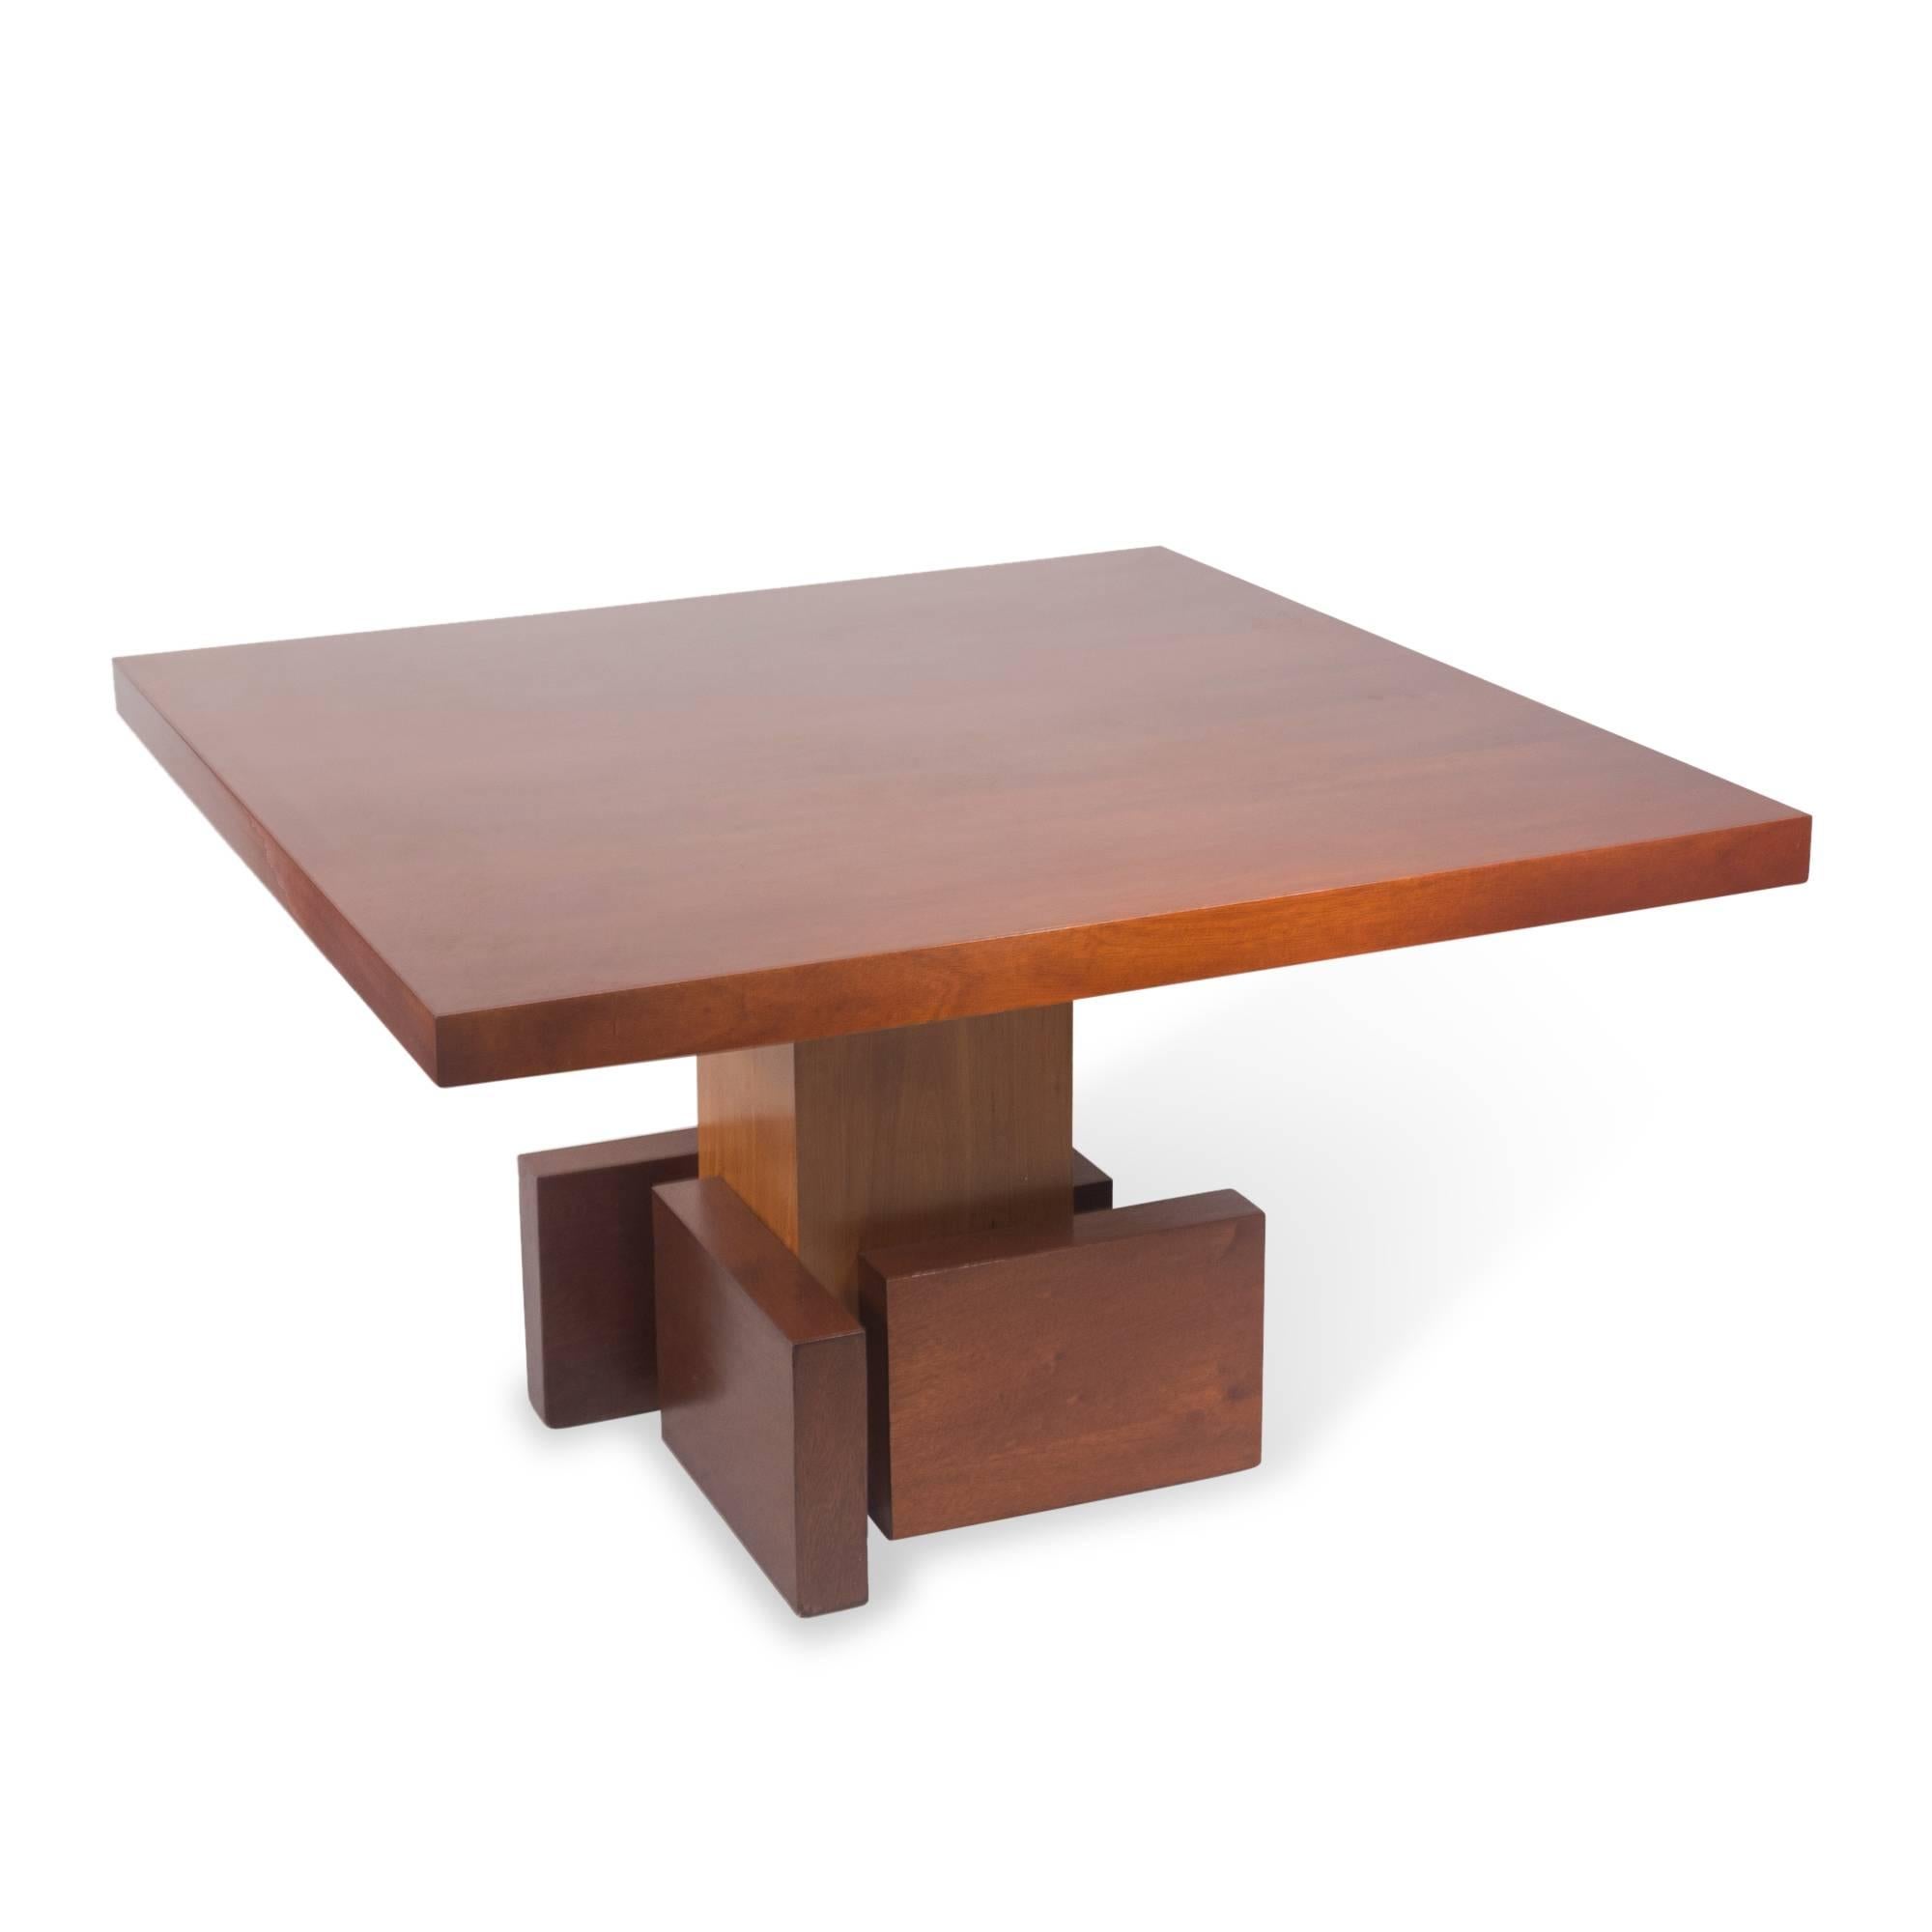 Mahogany Cubist Pedestal Base Square Dining Table, French, 1930s For Sale